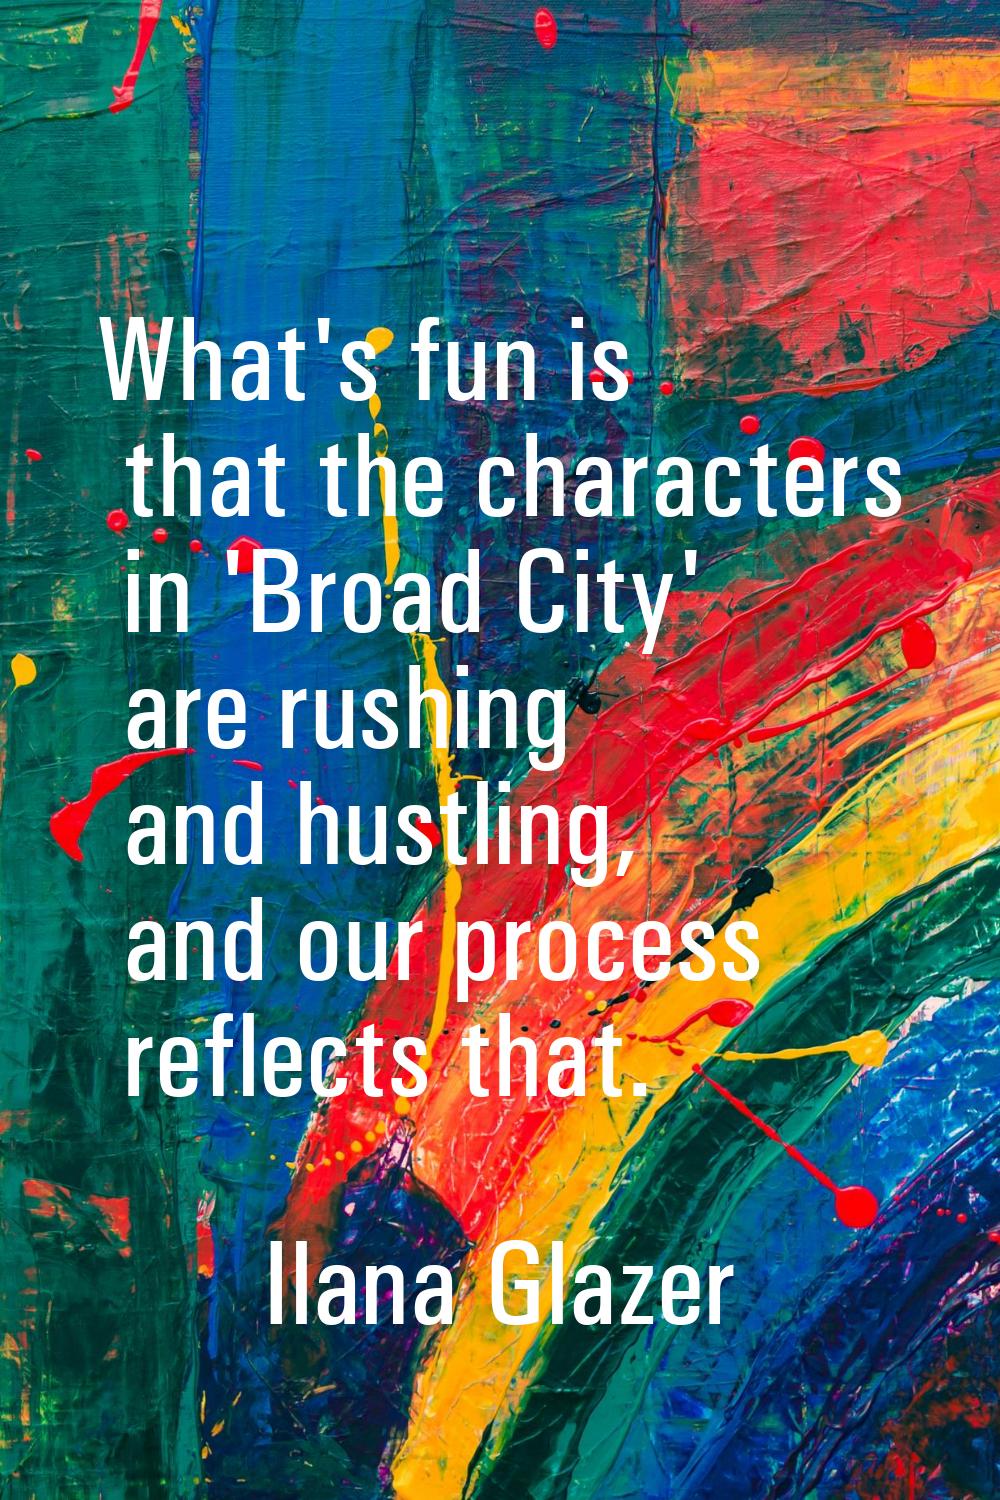 What's fun is that the characters in 'Broad City' are rushing and hustling, and our process reflect